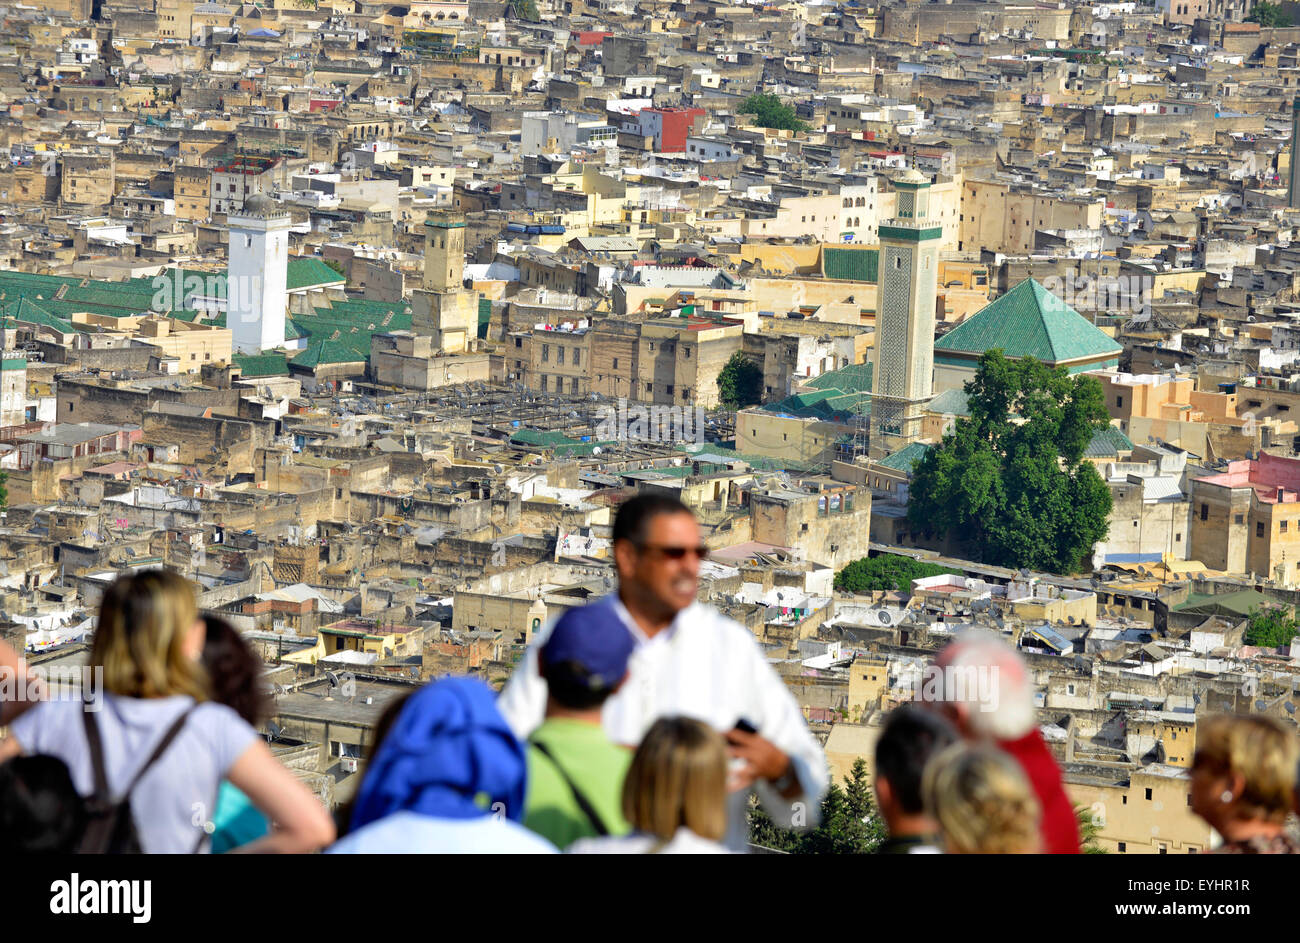 Fez, Fes, Morocco, North Africa. Tourists with Moroccan guide looking down on Fez, Morocco, North Africa. Stock Photo